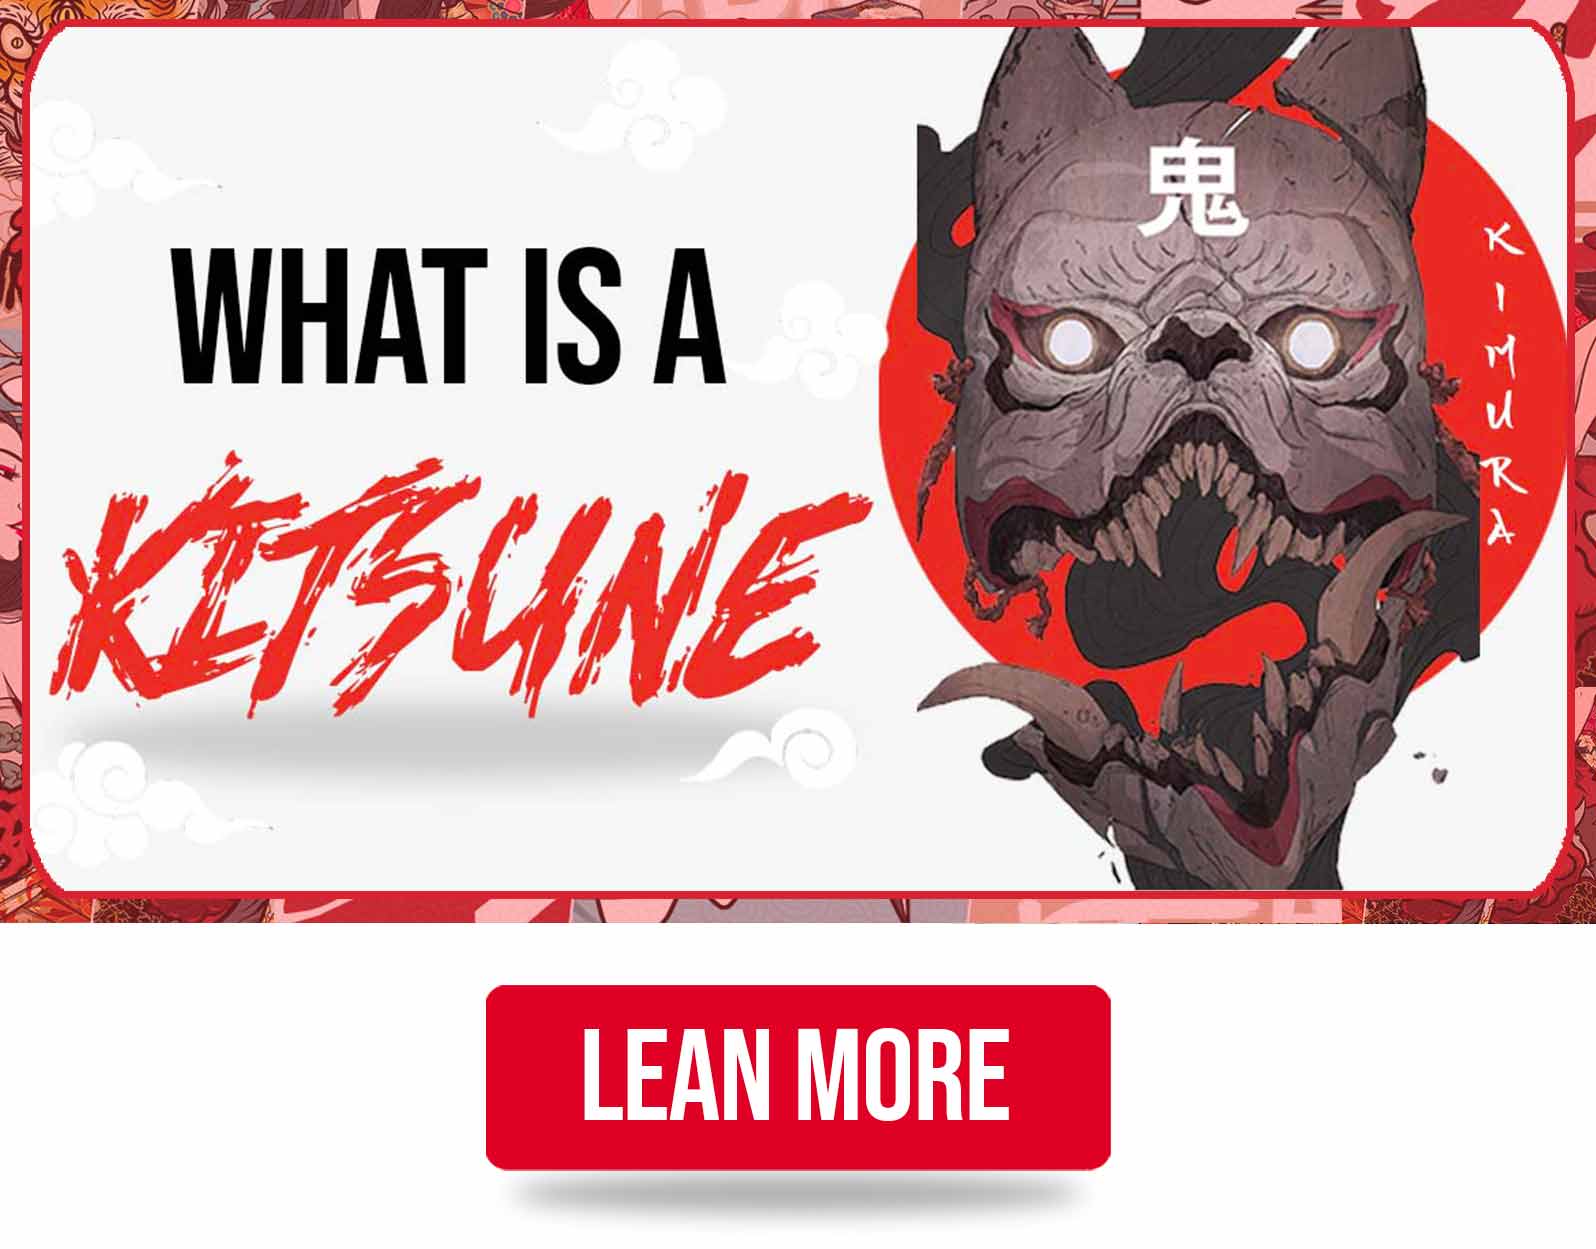 what-is-a-japanese-kitsune?